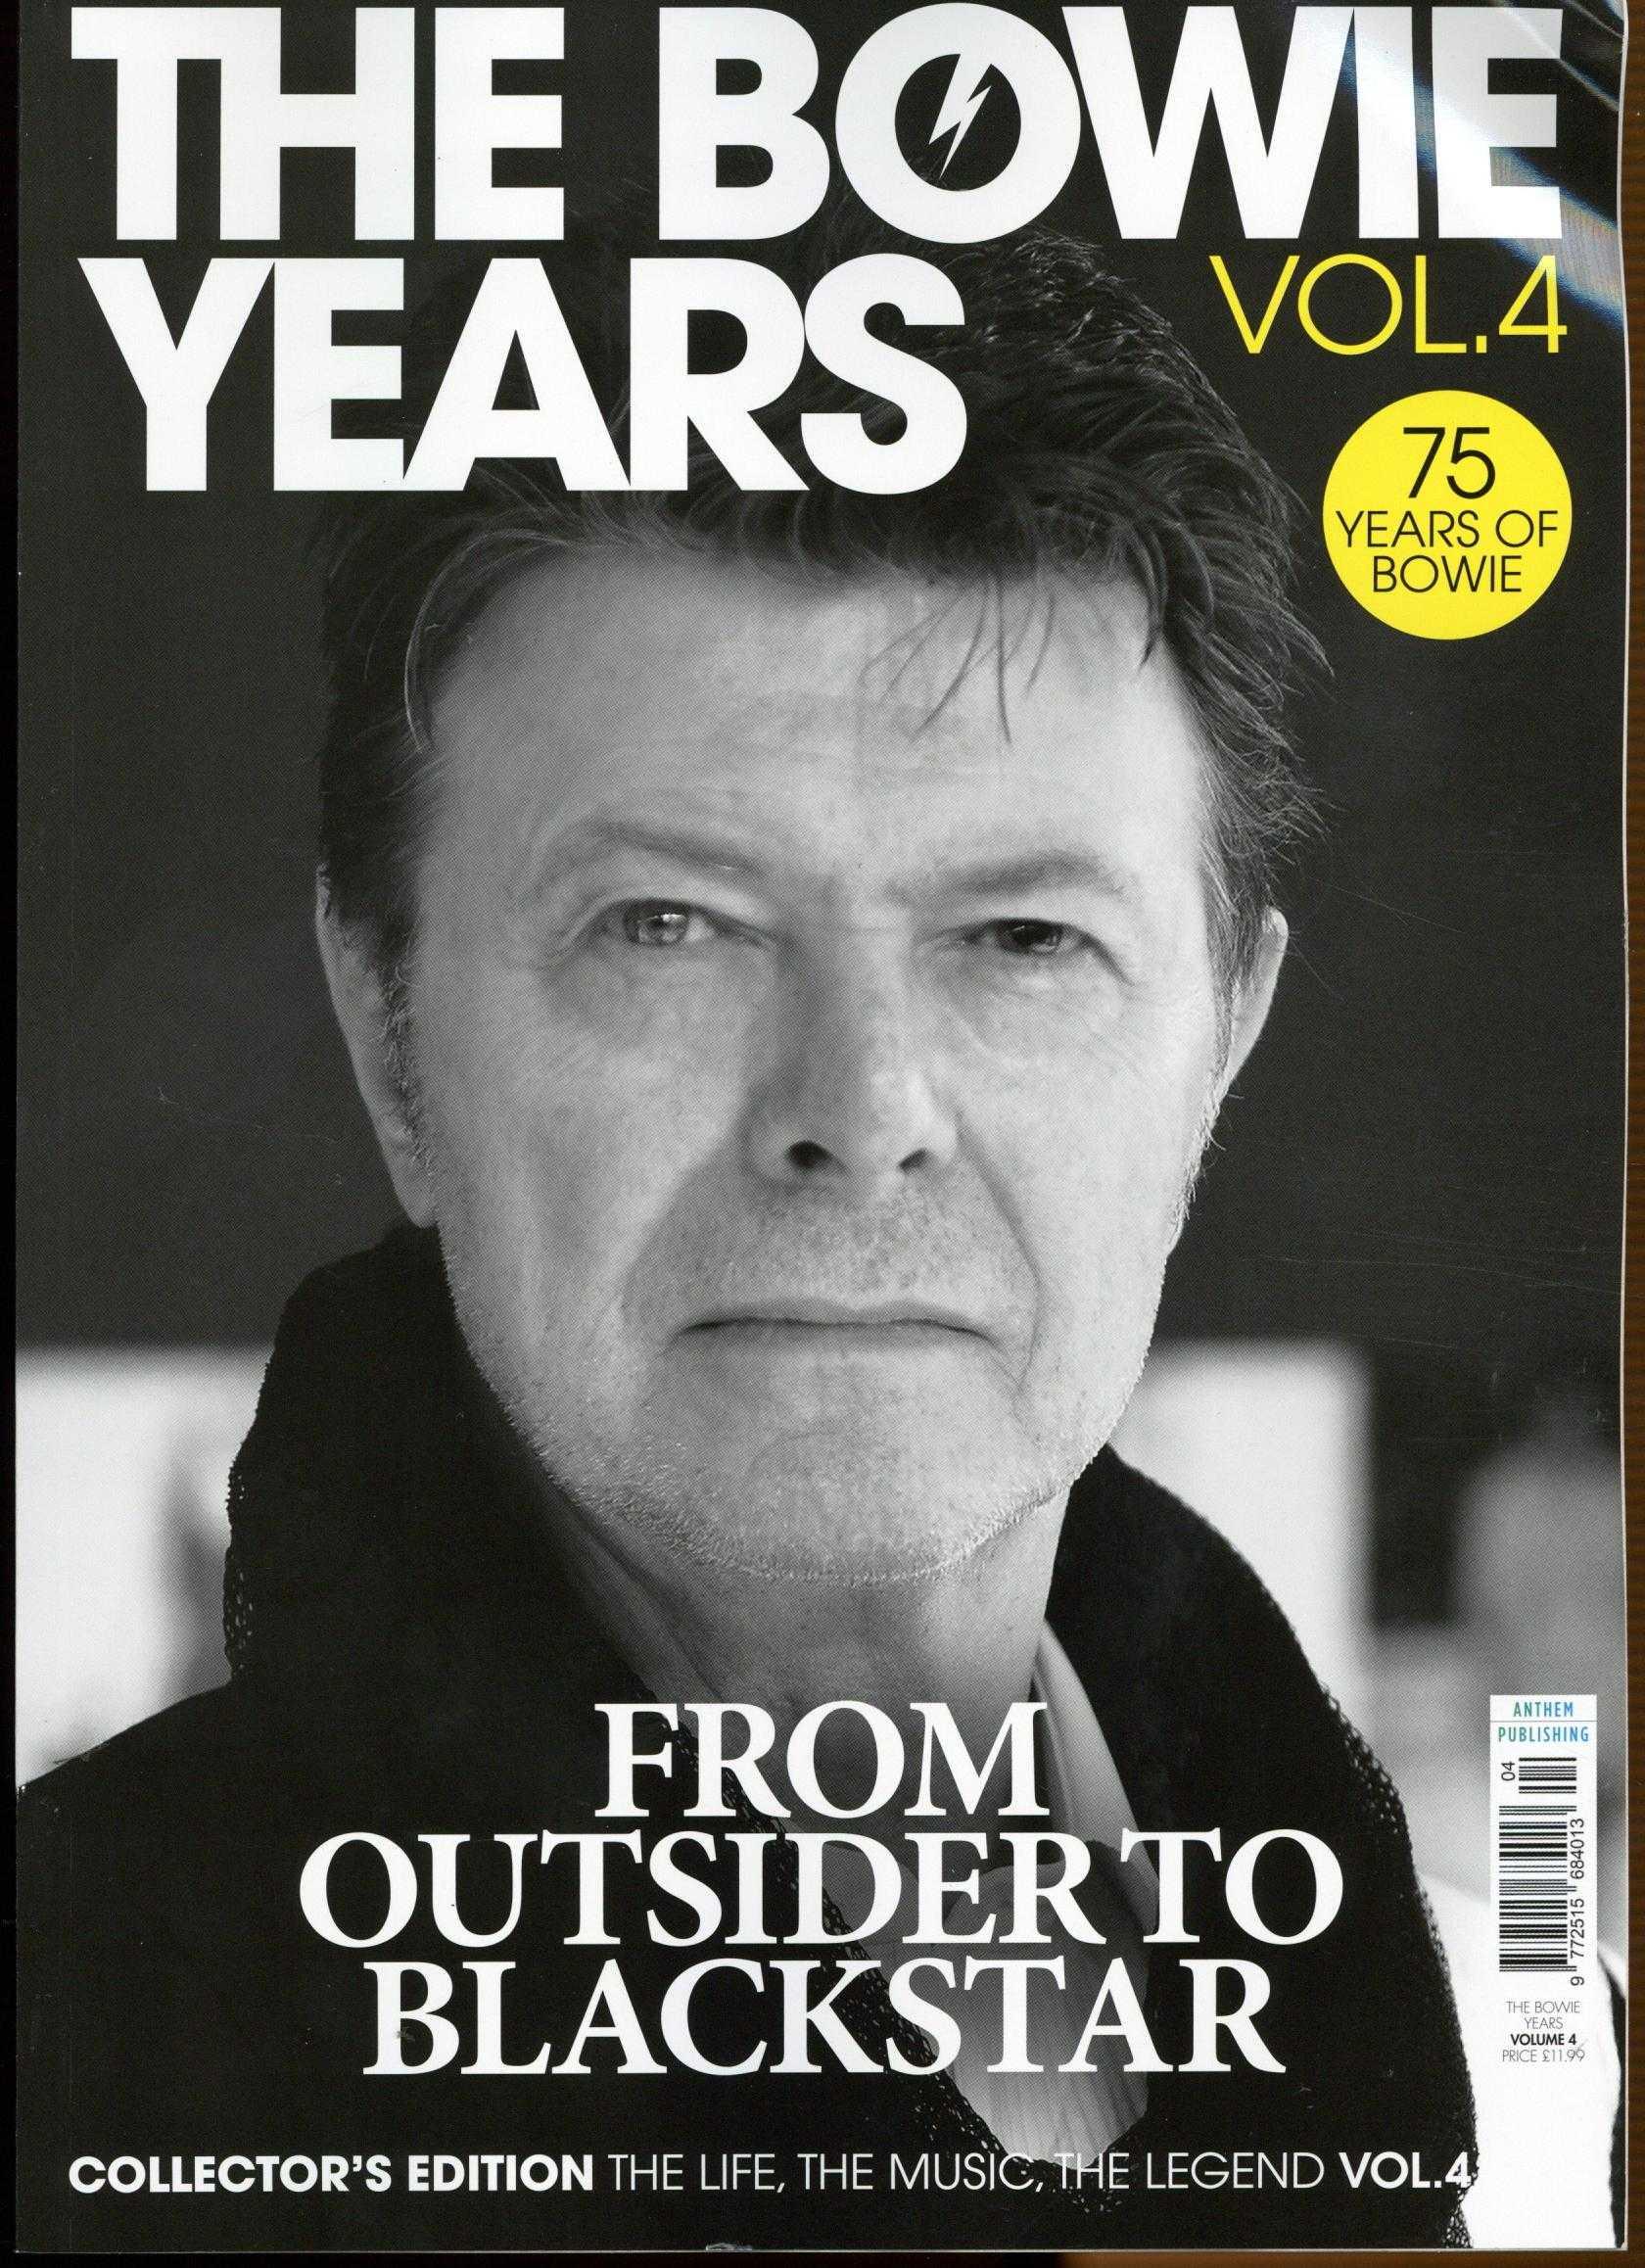 The Bowie Years